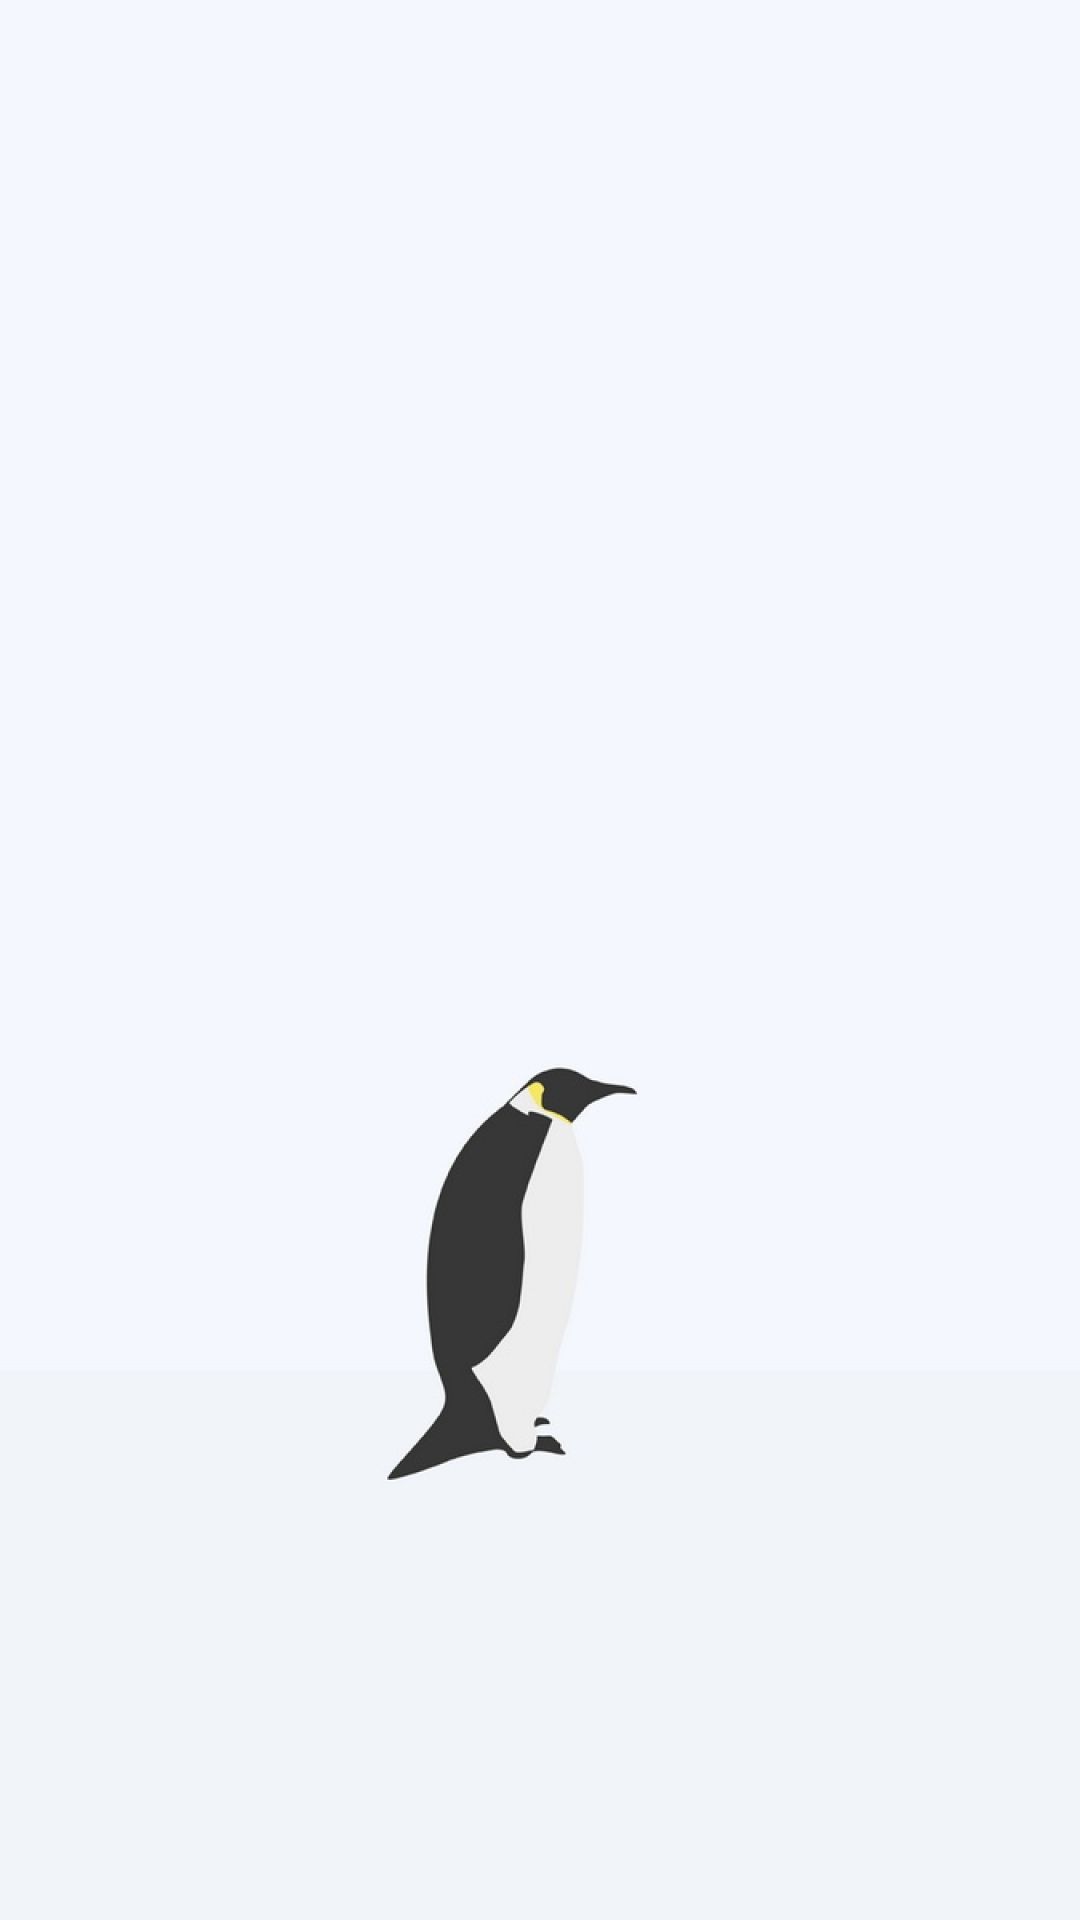 Penguin Check Out More Minimal Animals Wallpaper For iPhone